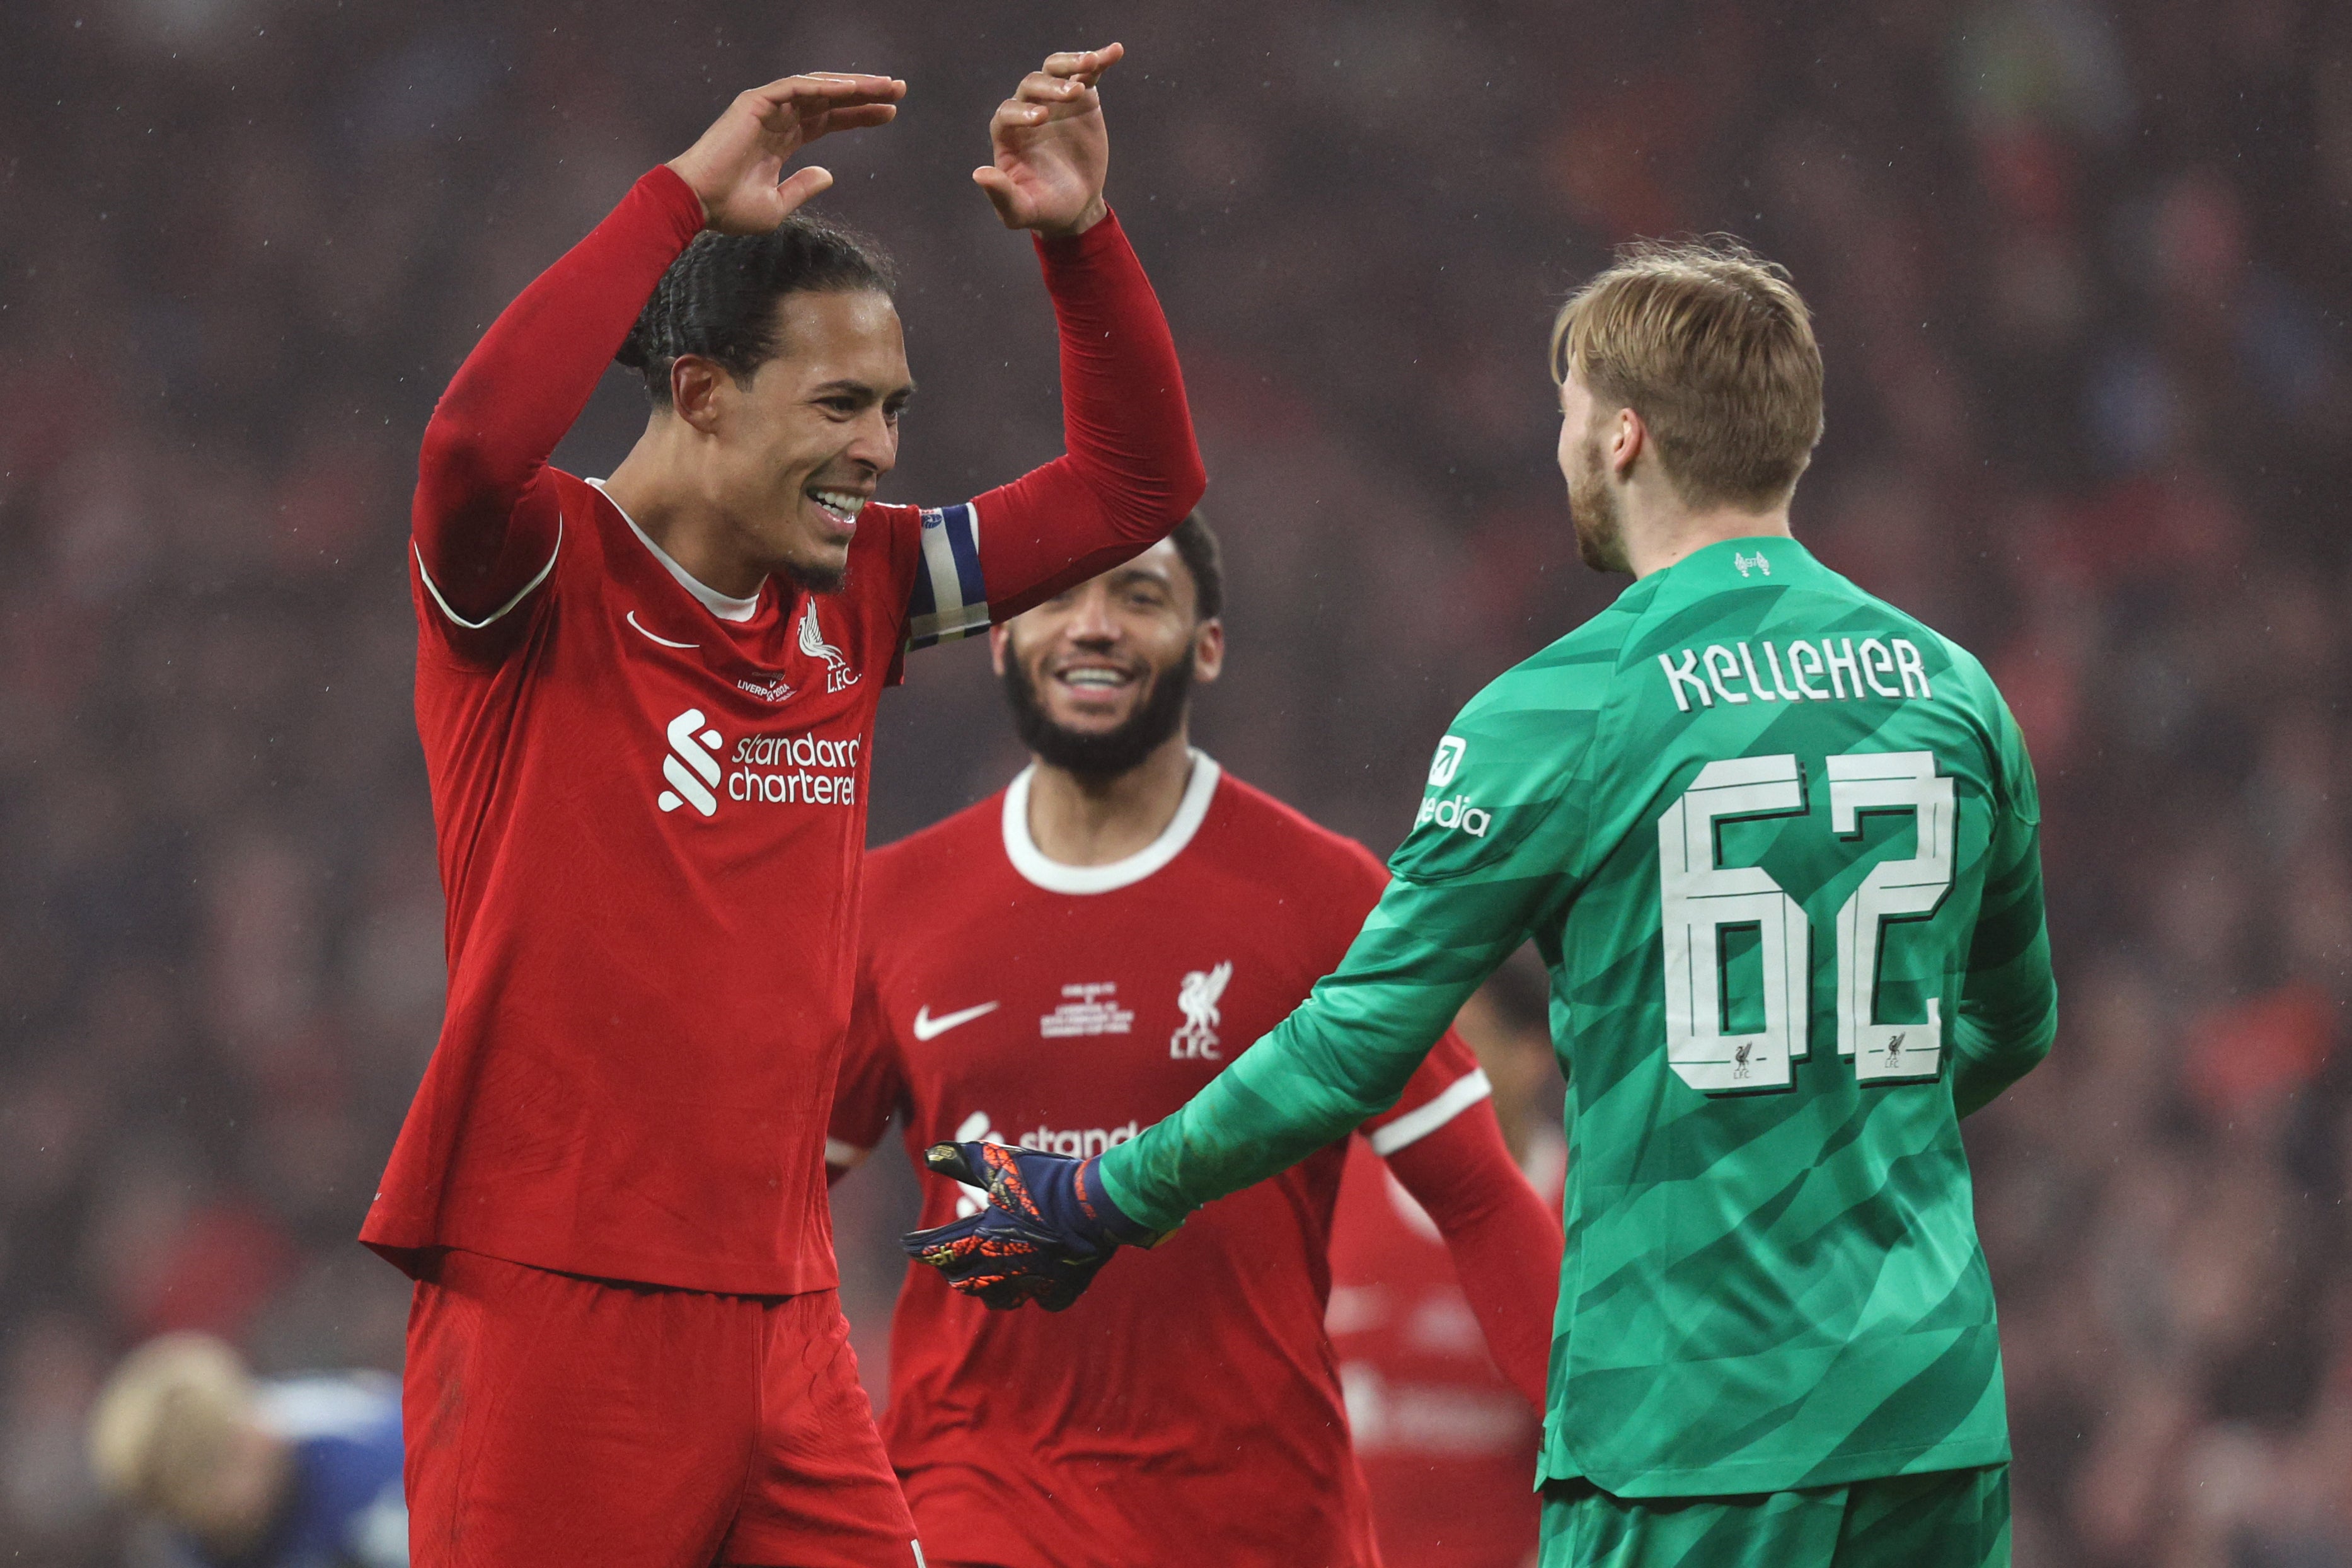 Liverpool’s captain celebrates with Caoimhin Kelleher – the goalkeeper kept the Reds in the game with key saves